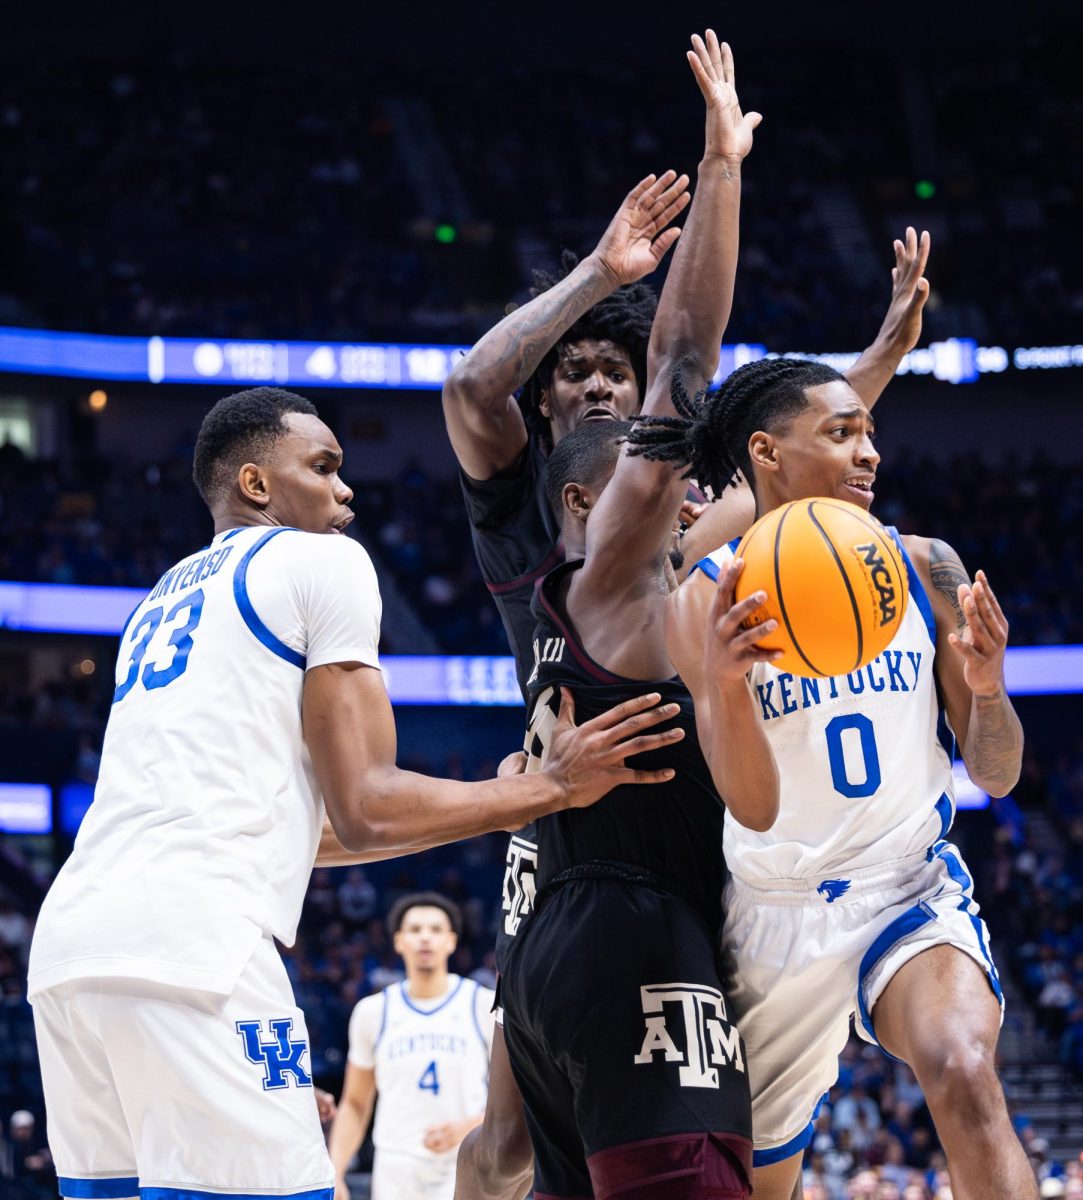 Kentucky guard Rob Dillingham (0) looks for a pass during the No. 2 Kentucky vs. No. 7 Texas A&M mens basketball match in the SEC Tournament quarterfinals on Friday, March 15, 2024, at Bridgestone Arena in Nashville, Tennessee. Kentucky lost 97-87. Photo by Samuel Colmar | Staff